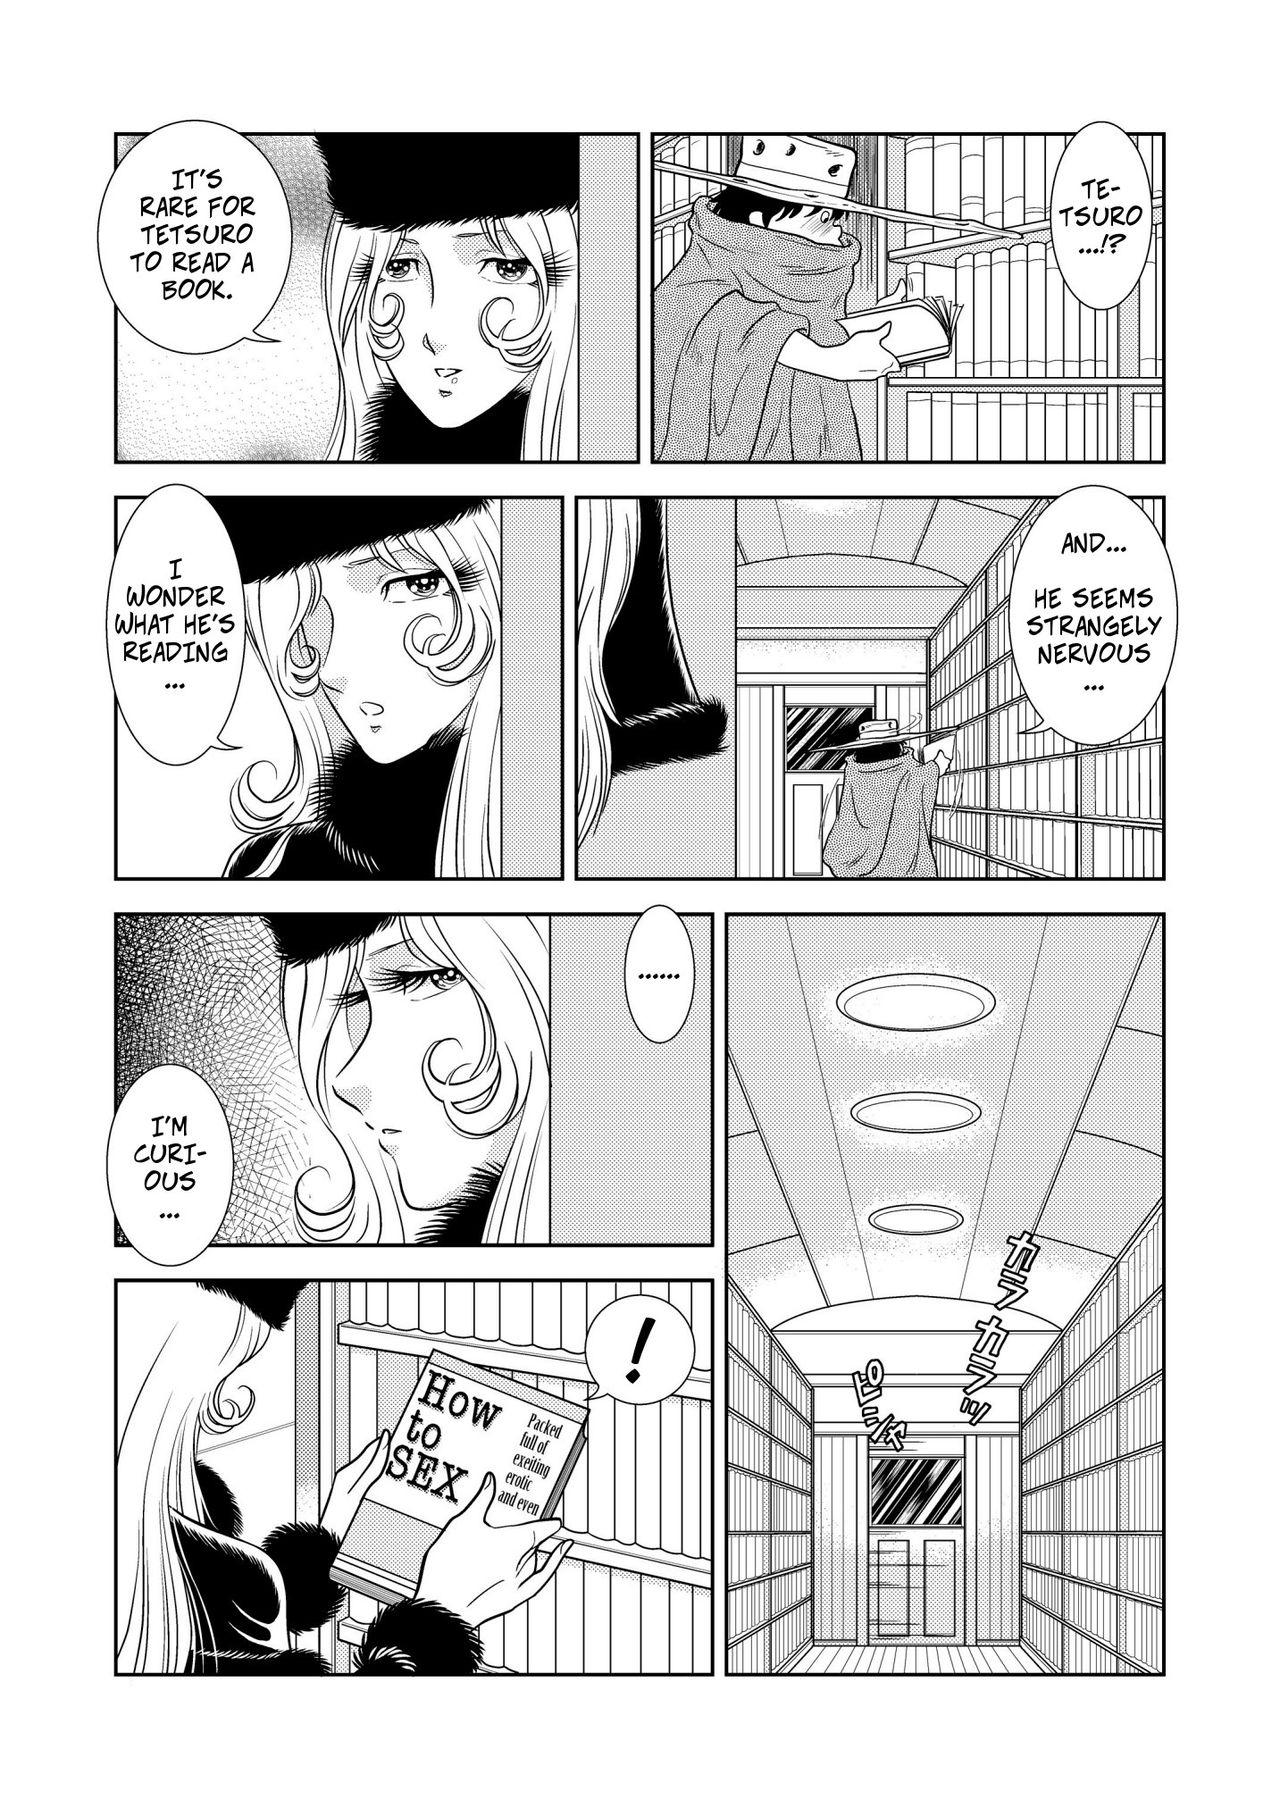 Toilet Maetel Story 2 - Galaxy express 999 Black Dick - Page 3